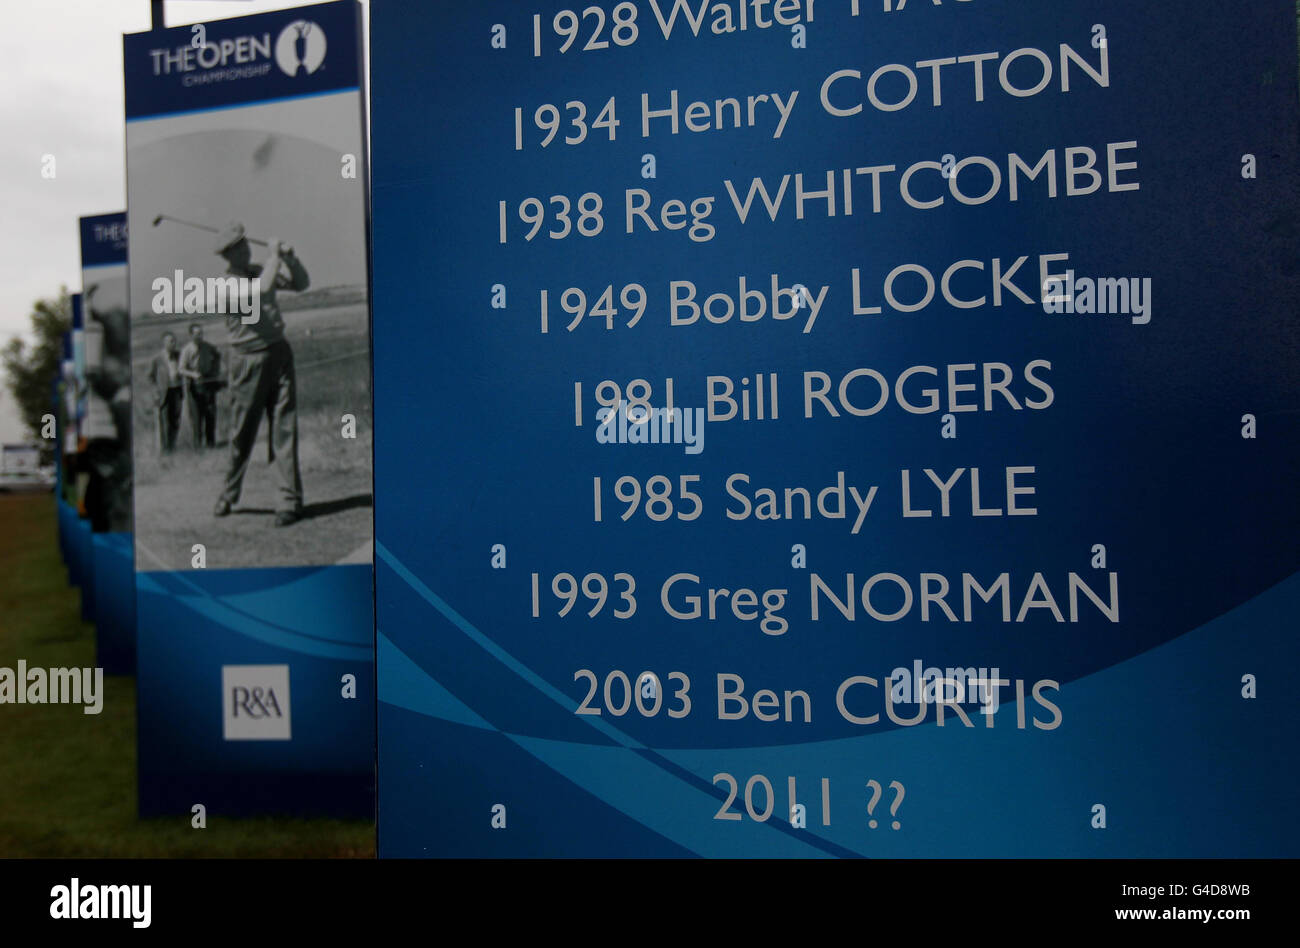 Golf - The Open Championship 2011 - Day One - Royal St George's. A board showing previous winners before the 2011 Open Championship at Royal St George's, Sandwich. Stock Photo